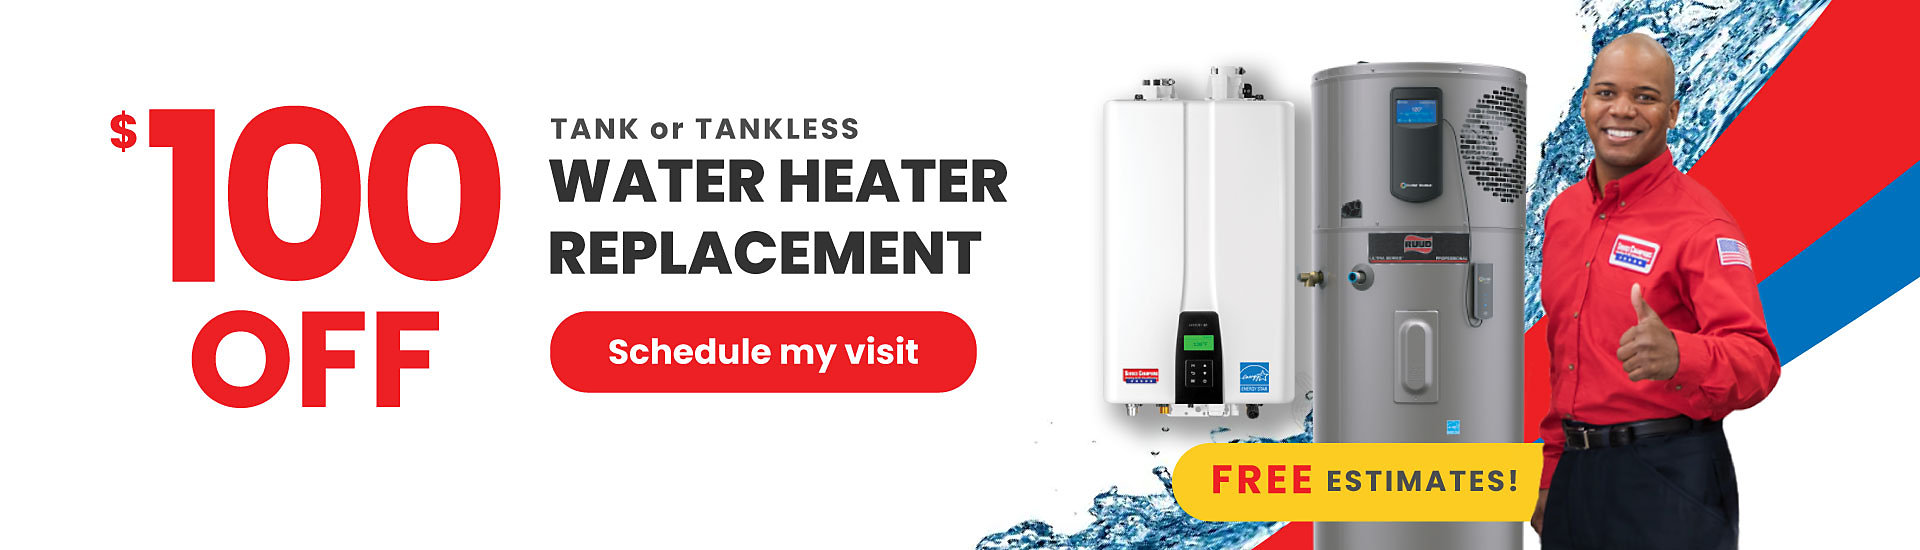 $100 OFF Water Heater Replacement